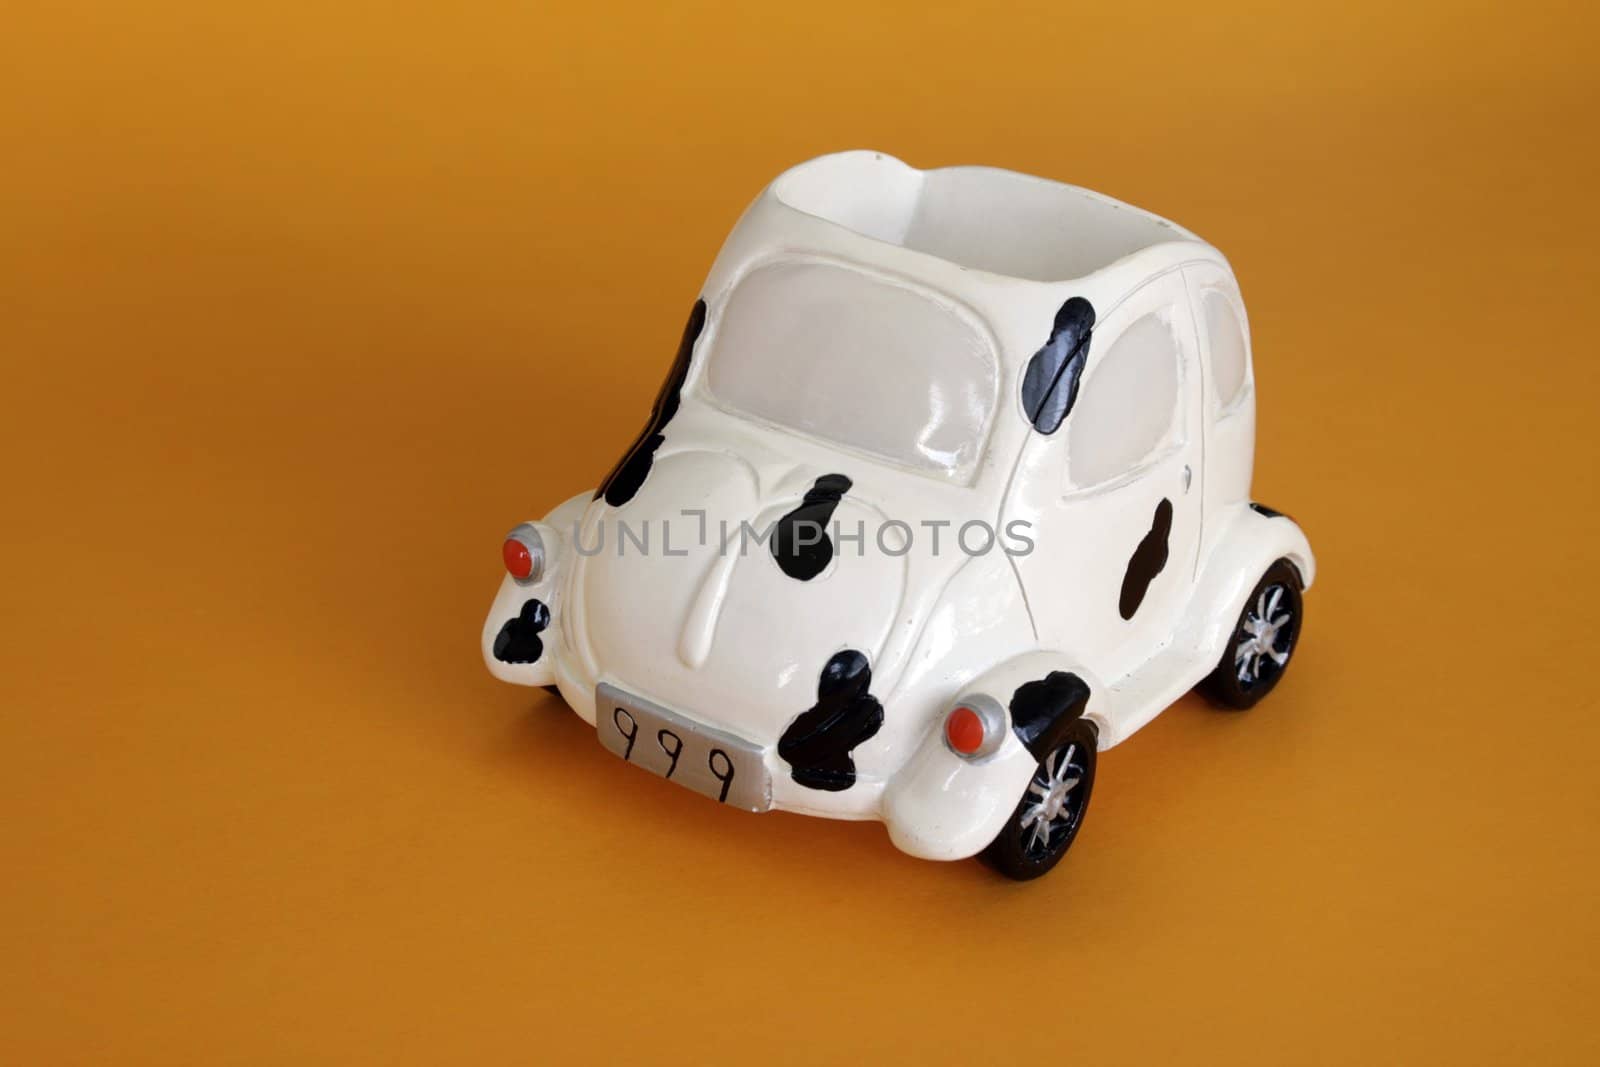 Toy ceramic car in isolated over yellow